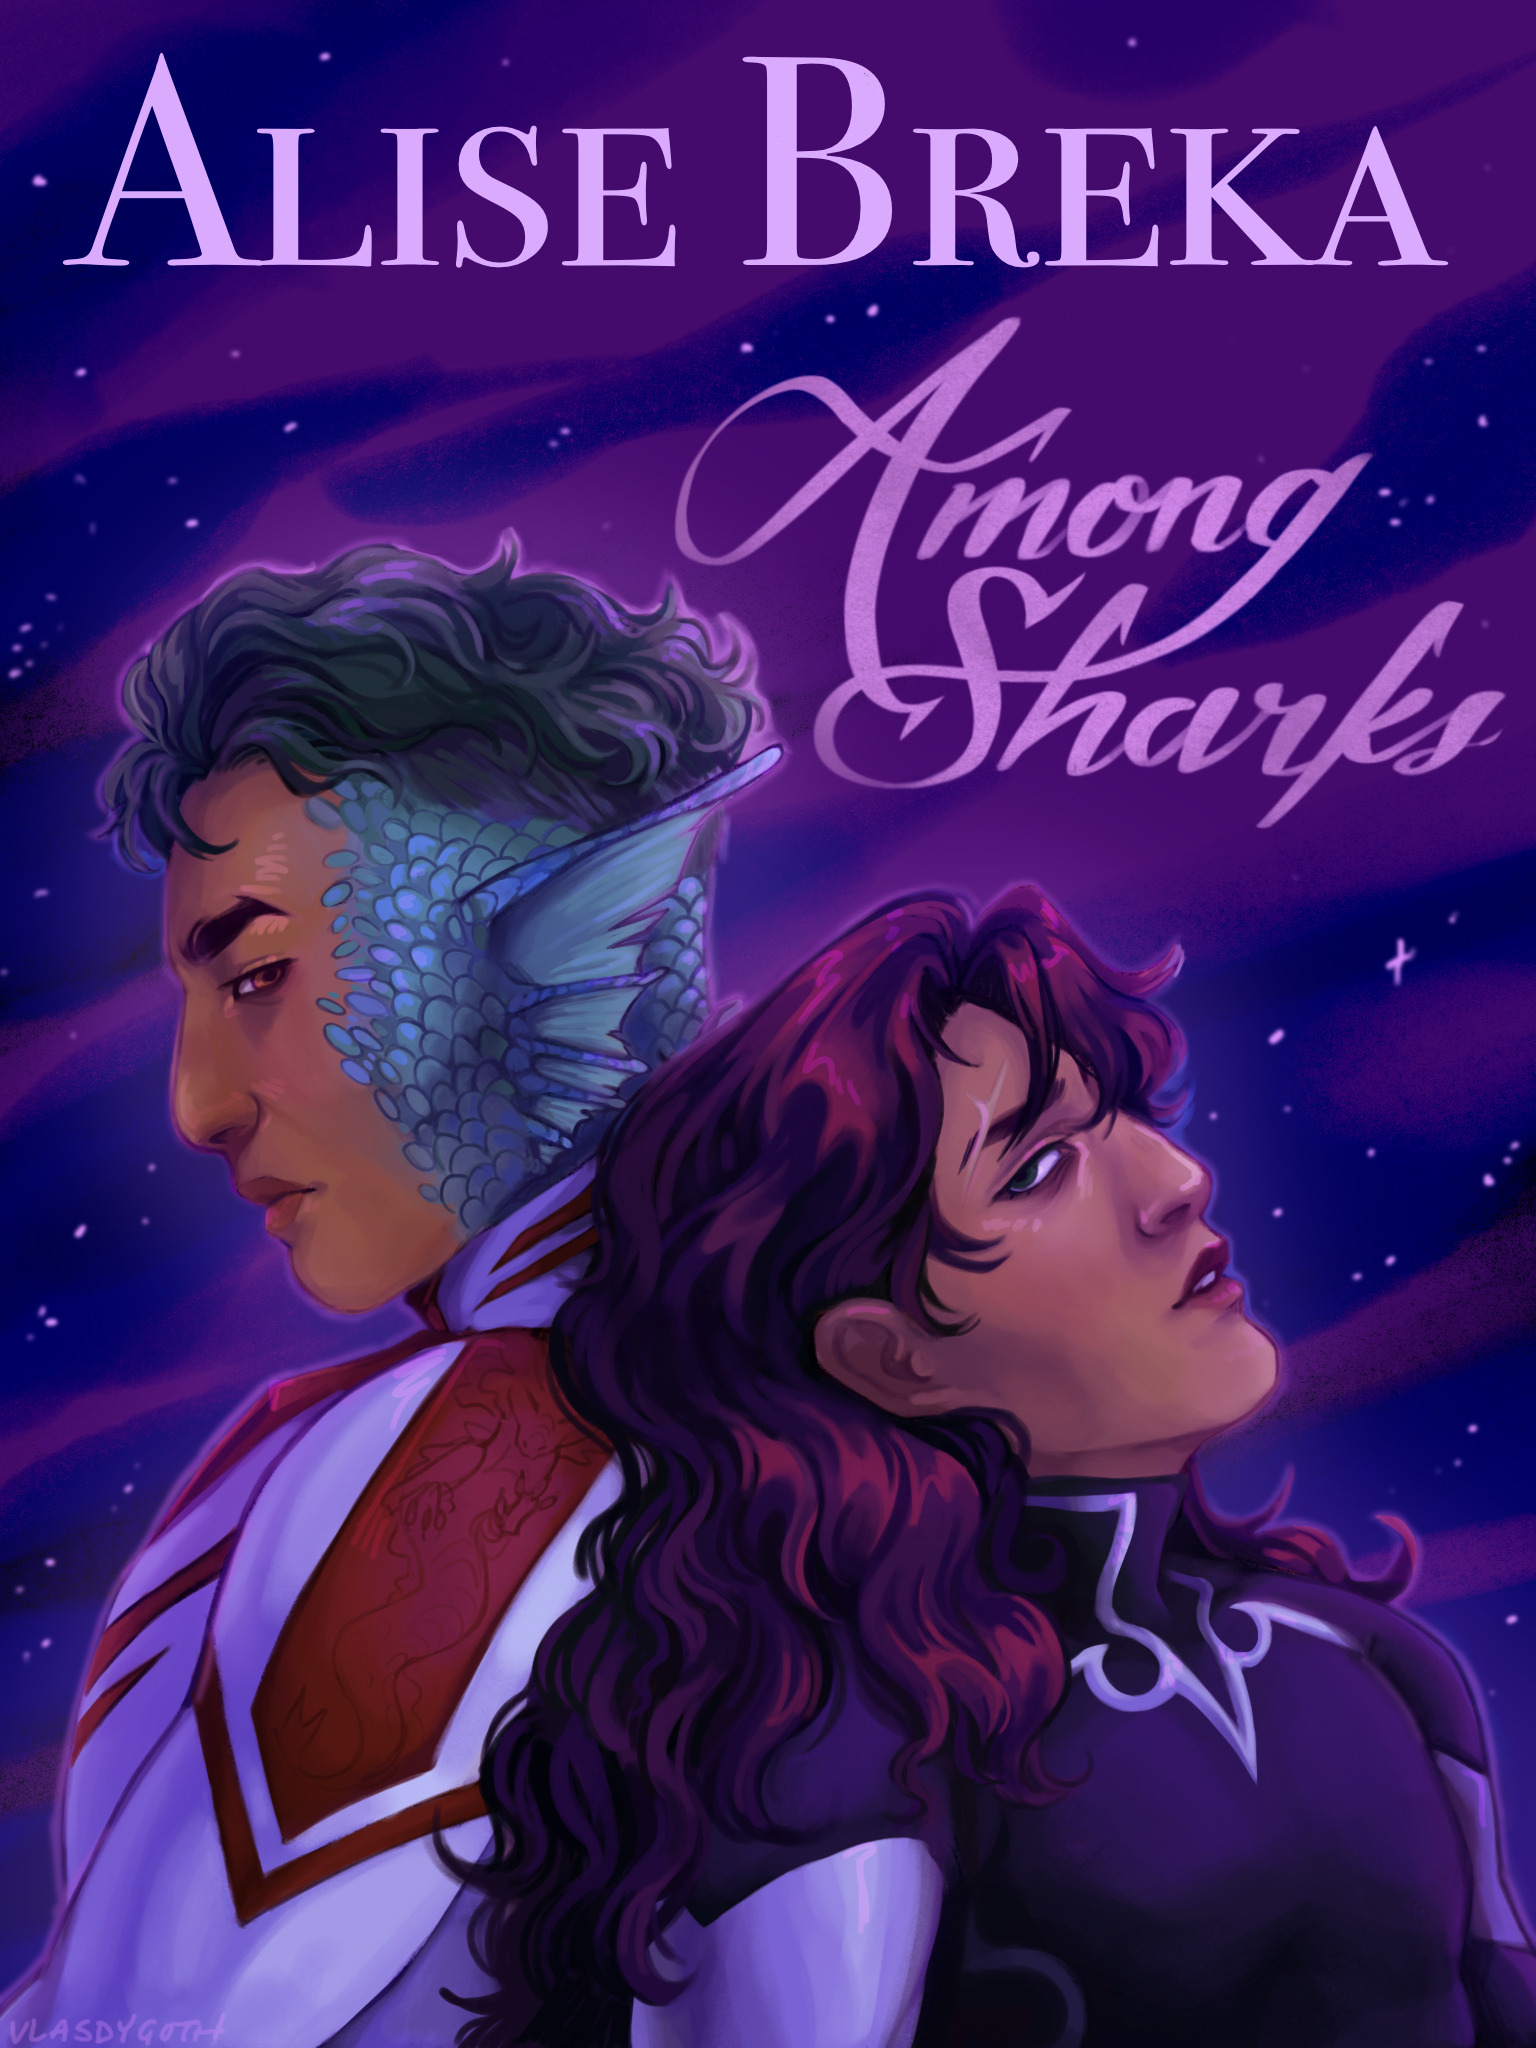 Cover for Alise Breka's Among Sharks. Misericorde and Cor'rina stand back-to-back in front of a nebula.